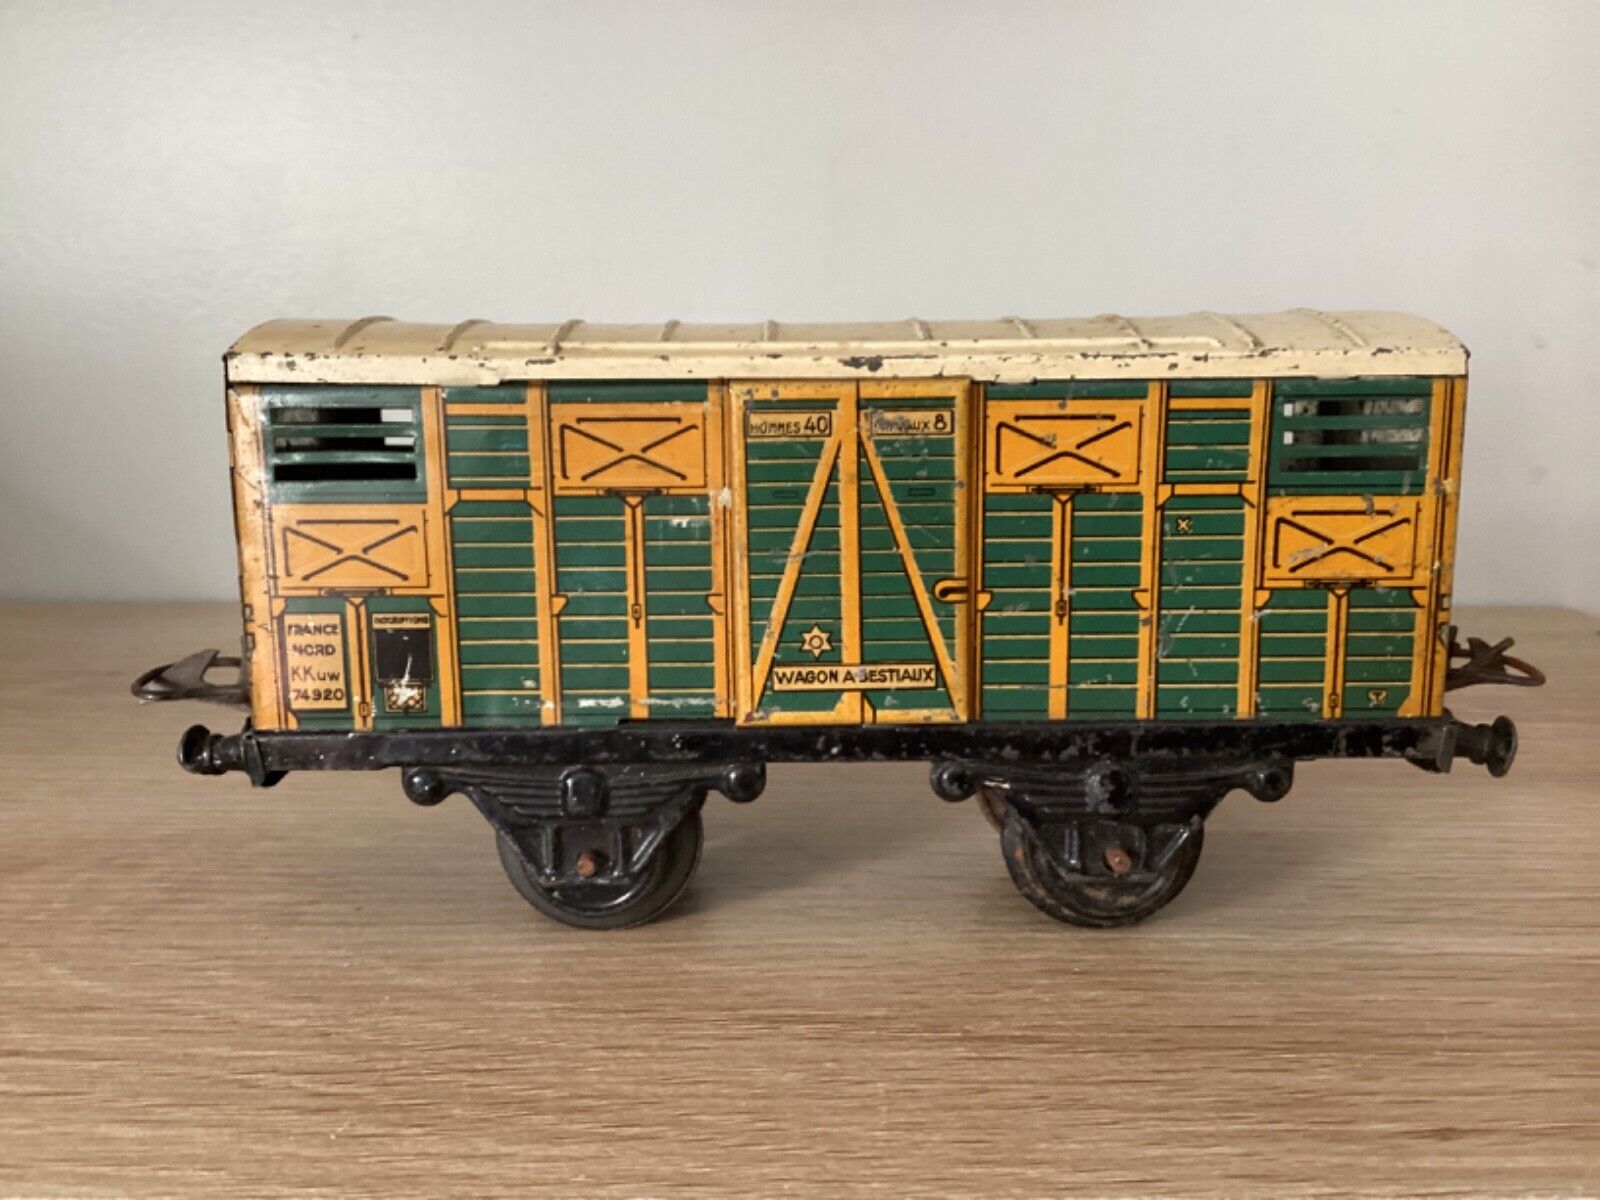 FRENCH HORNBY 1930s O GAUGE CATTLE WAGON. Green / Yellow / White